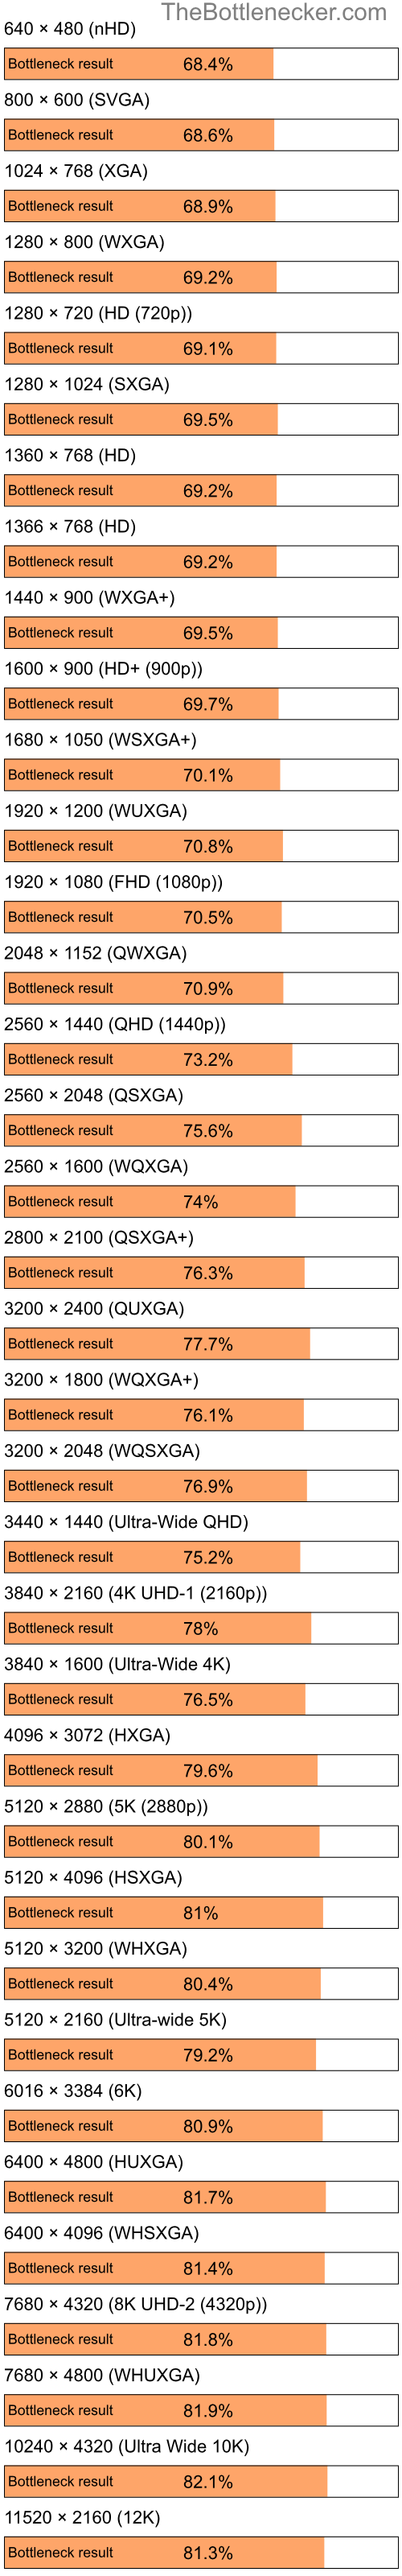 Bottleneck results by resolution for Intel Pentium 4 and NVIDIA GeForce FX 5700 in Processor Intense Tasks